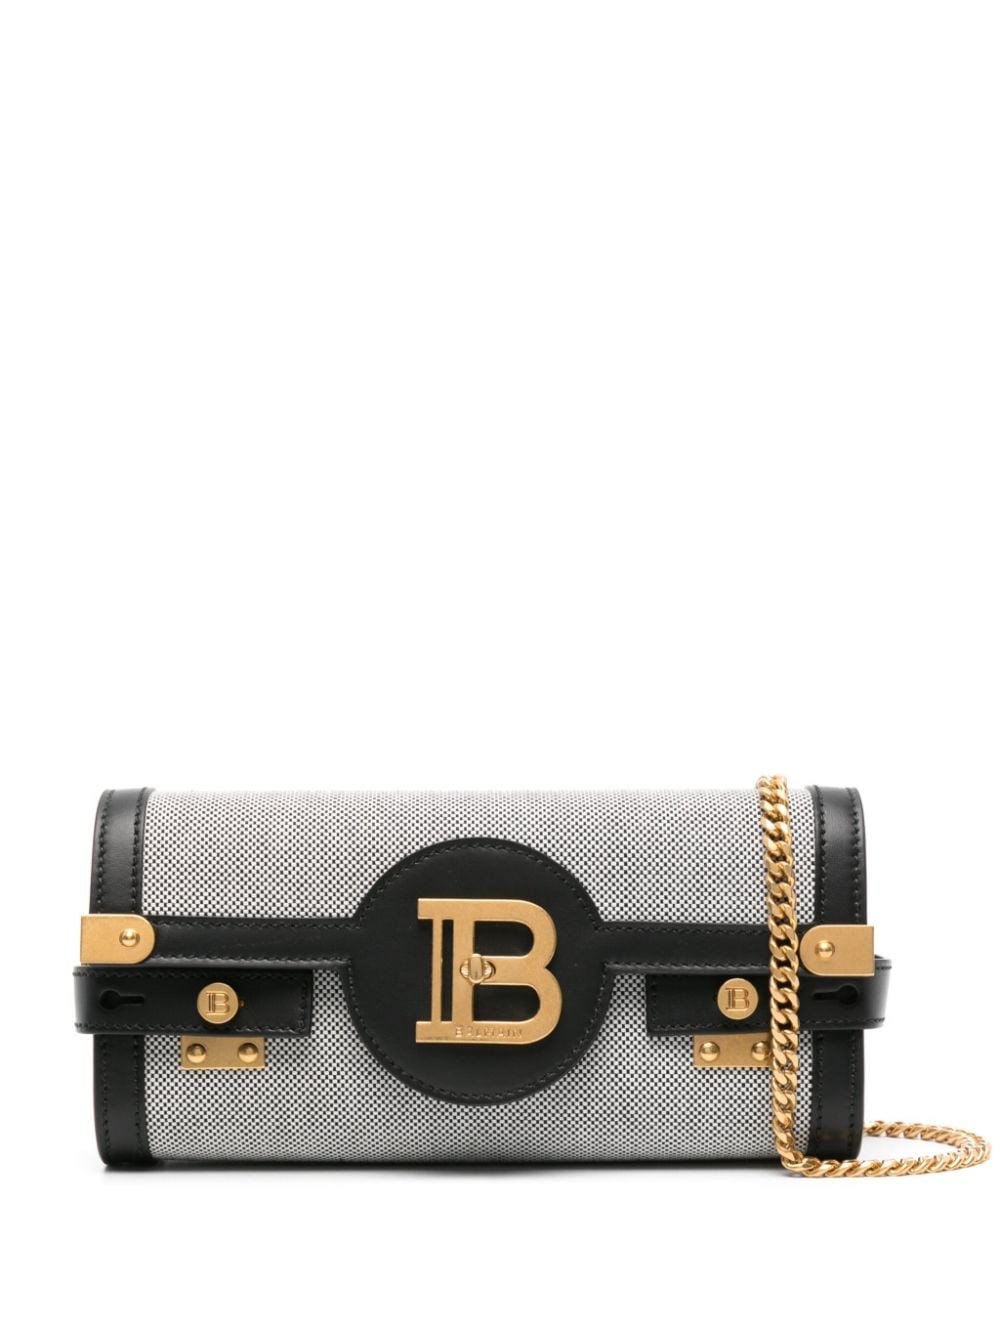 Balmain B-buzz 23 Canvas And Leather Clutch In Black  